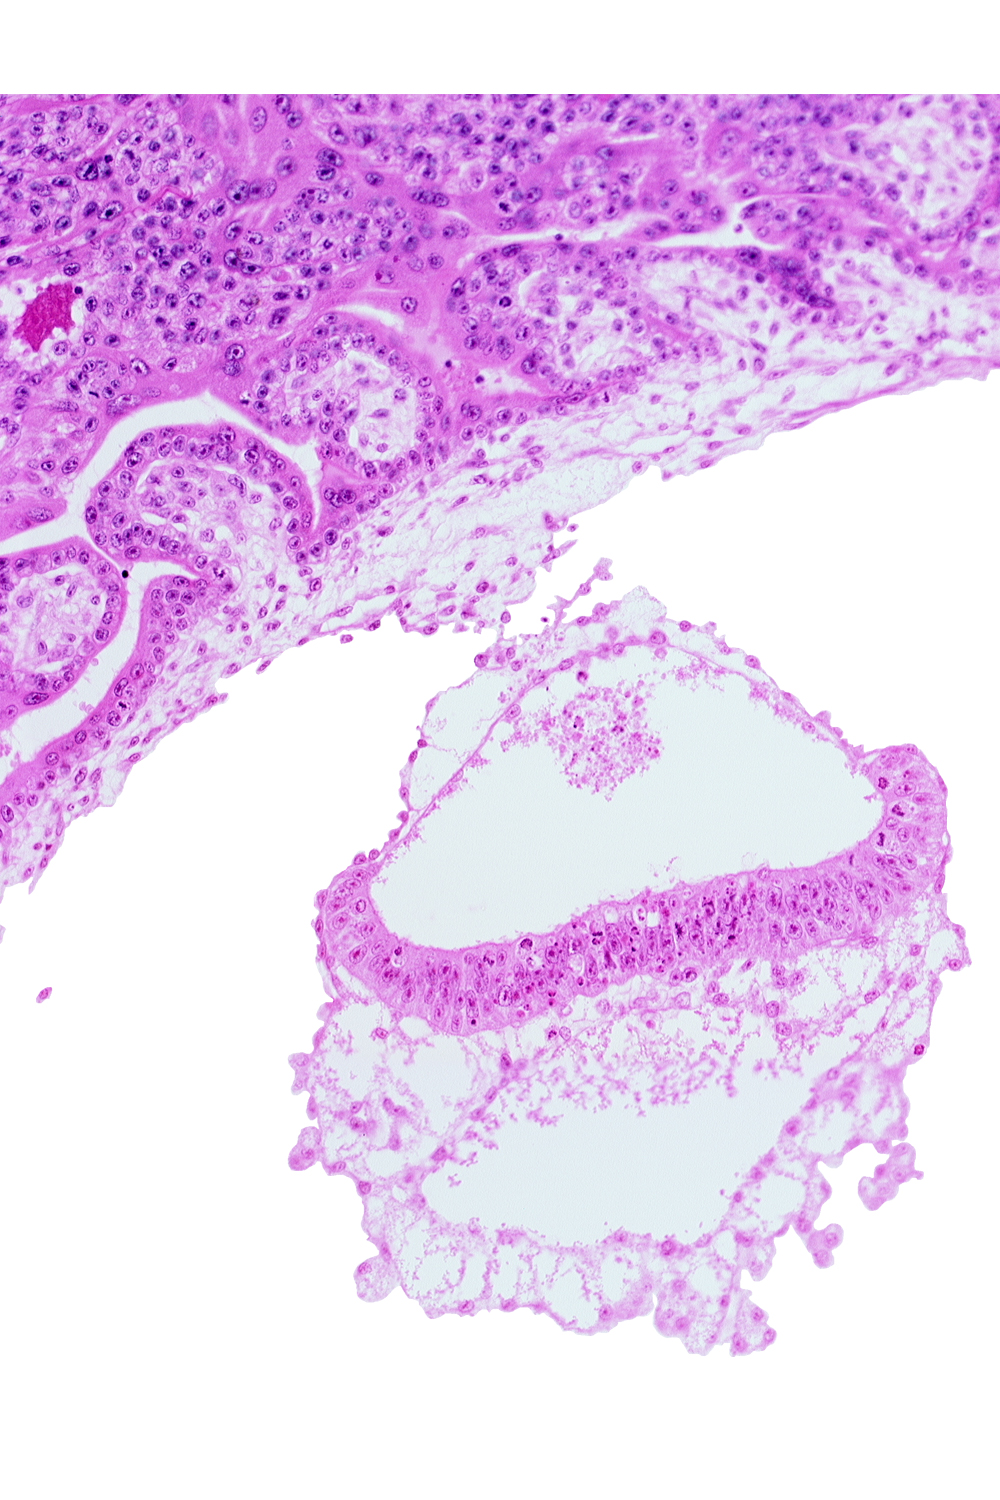 connecting stalk, epiblast, extra-embryonic coelom, head mesenchyme, hypoblast, junction of amnion and epiblast plate, two-layered amnion, umbilical vesicle wall